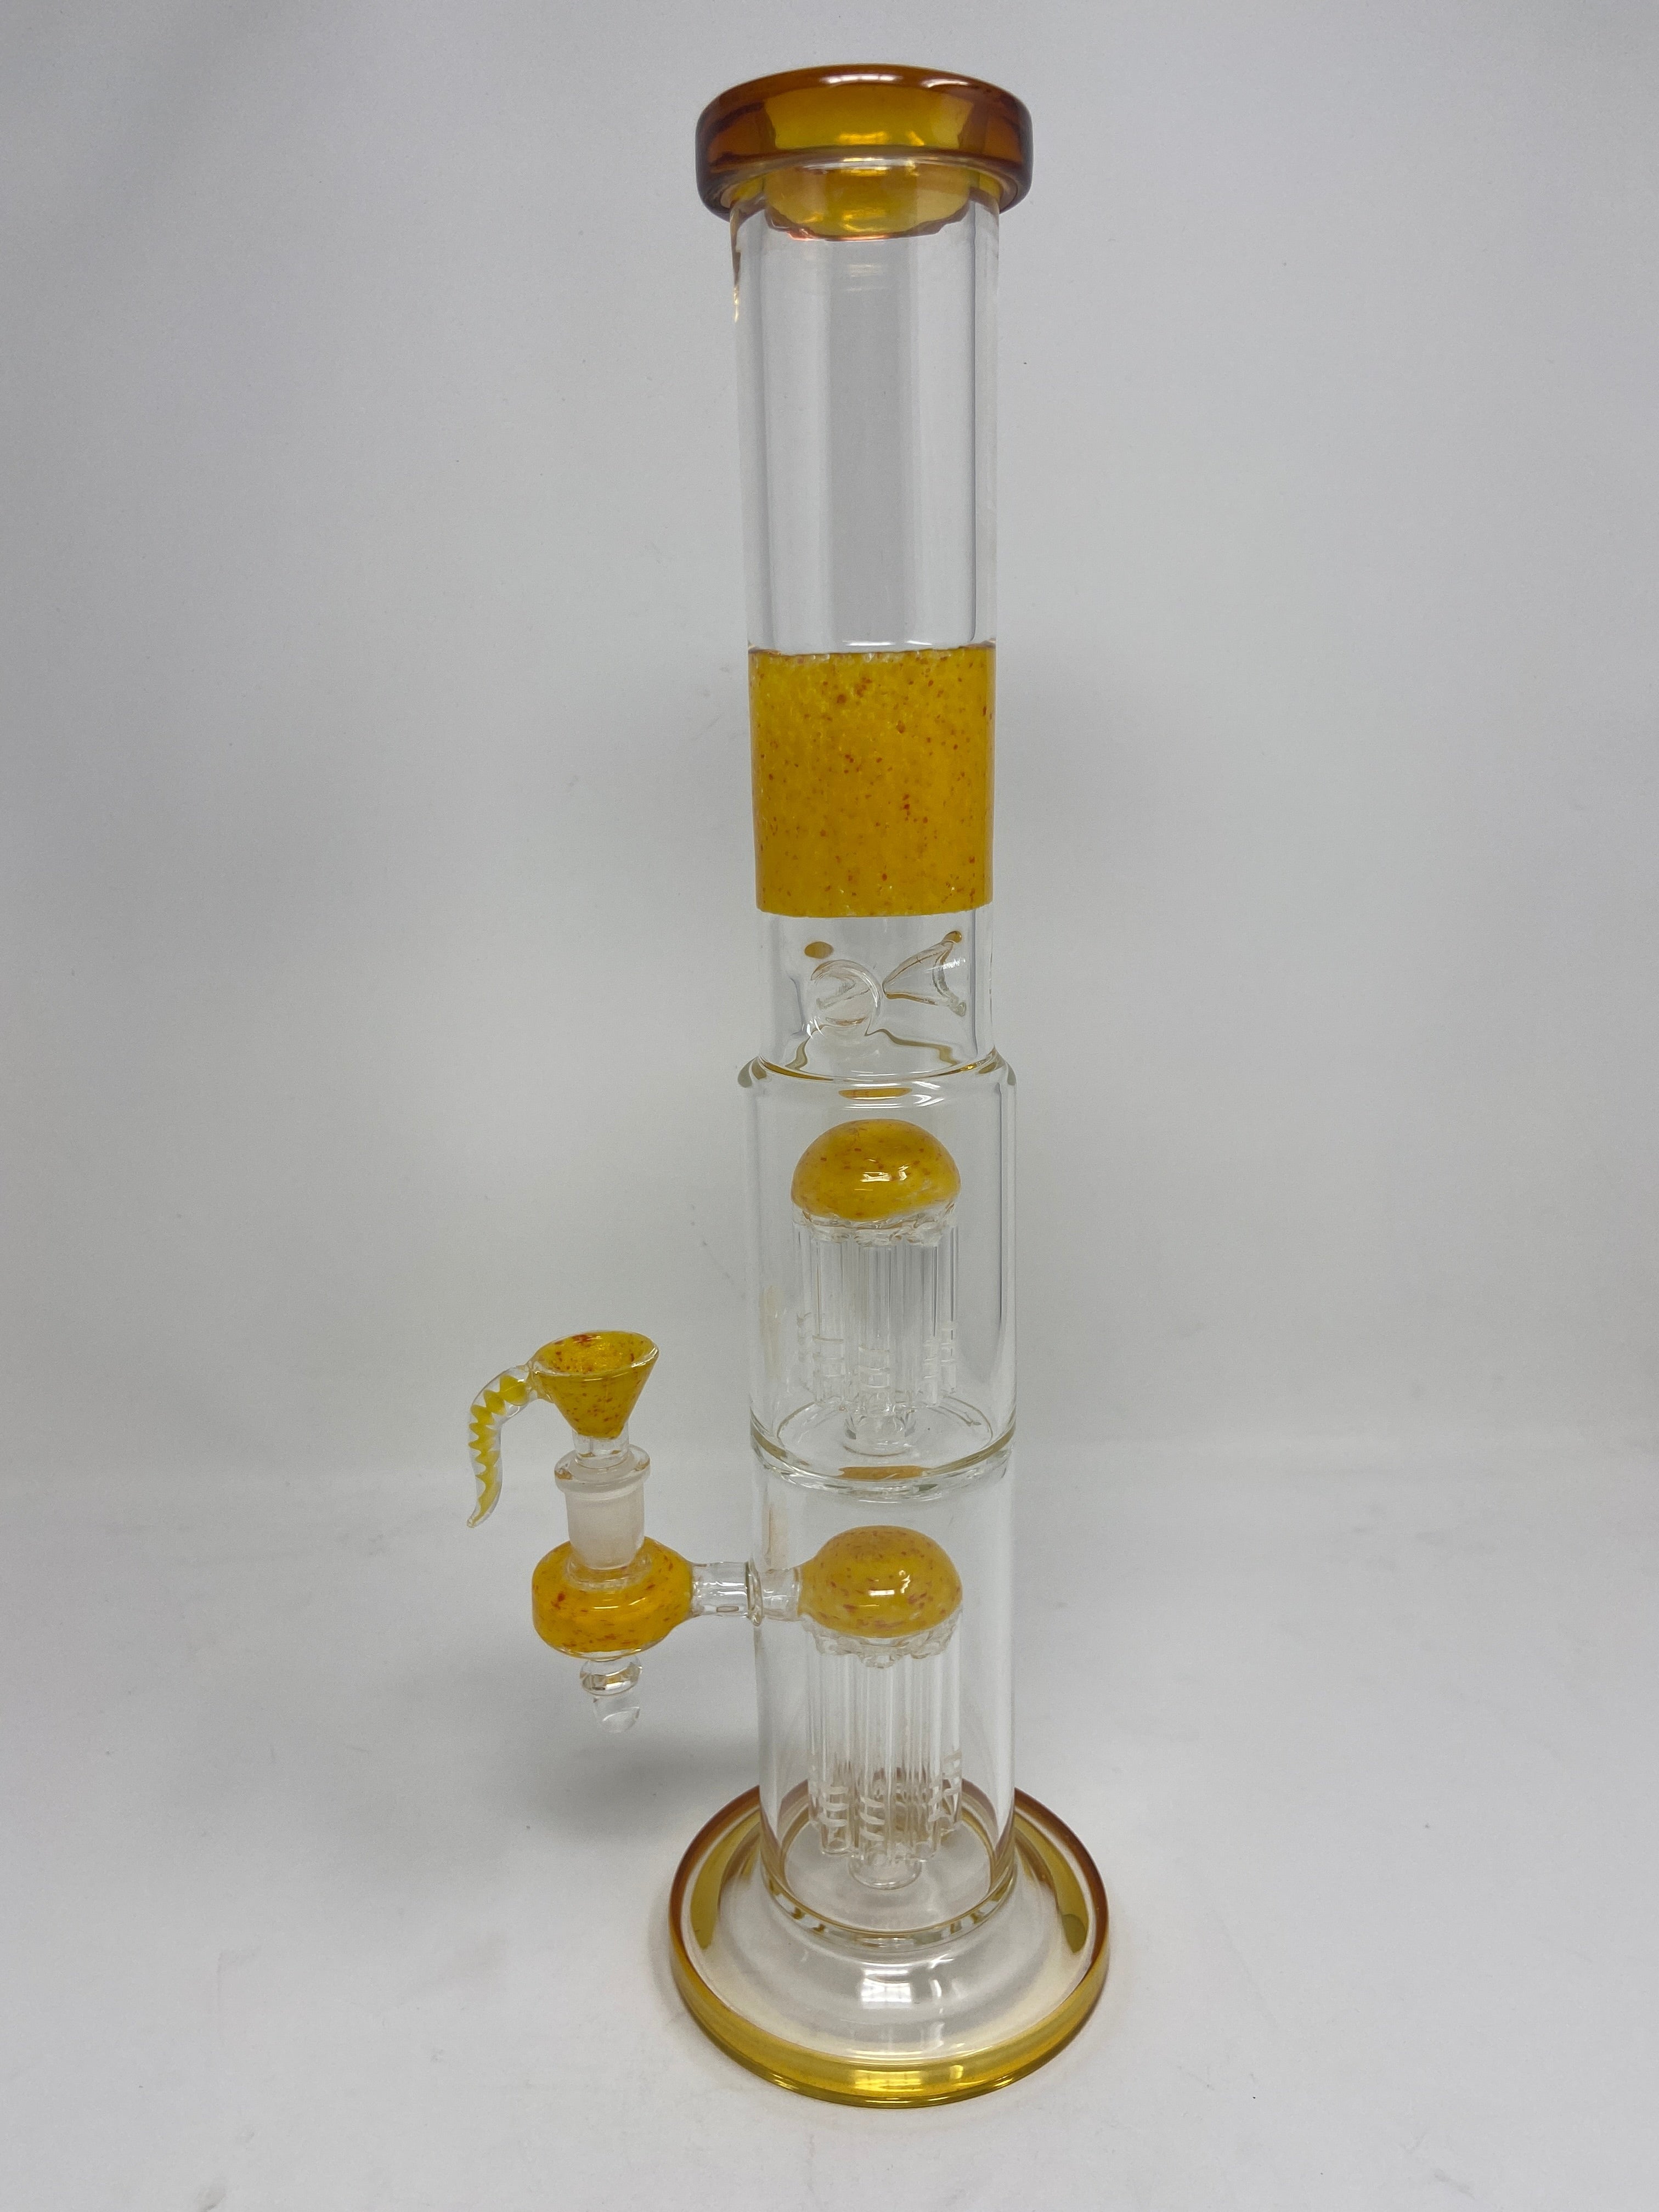 STRAIGHT TUBE WITH 2 LAYER TREE PERC COMES WITH FANCY HORN BOWL - Limitless Puff